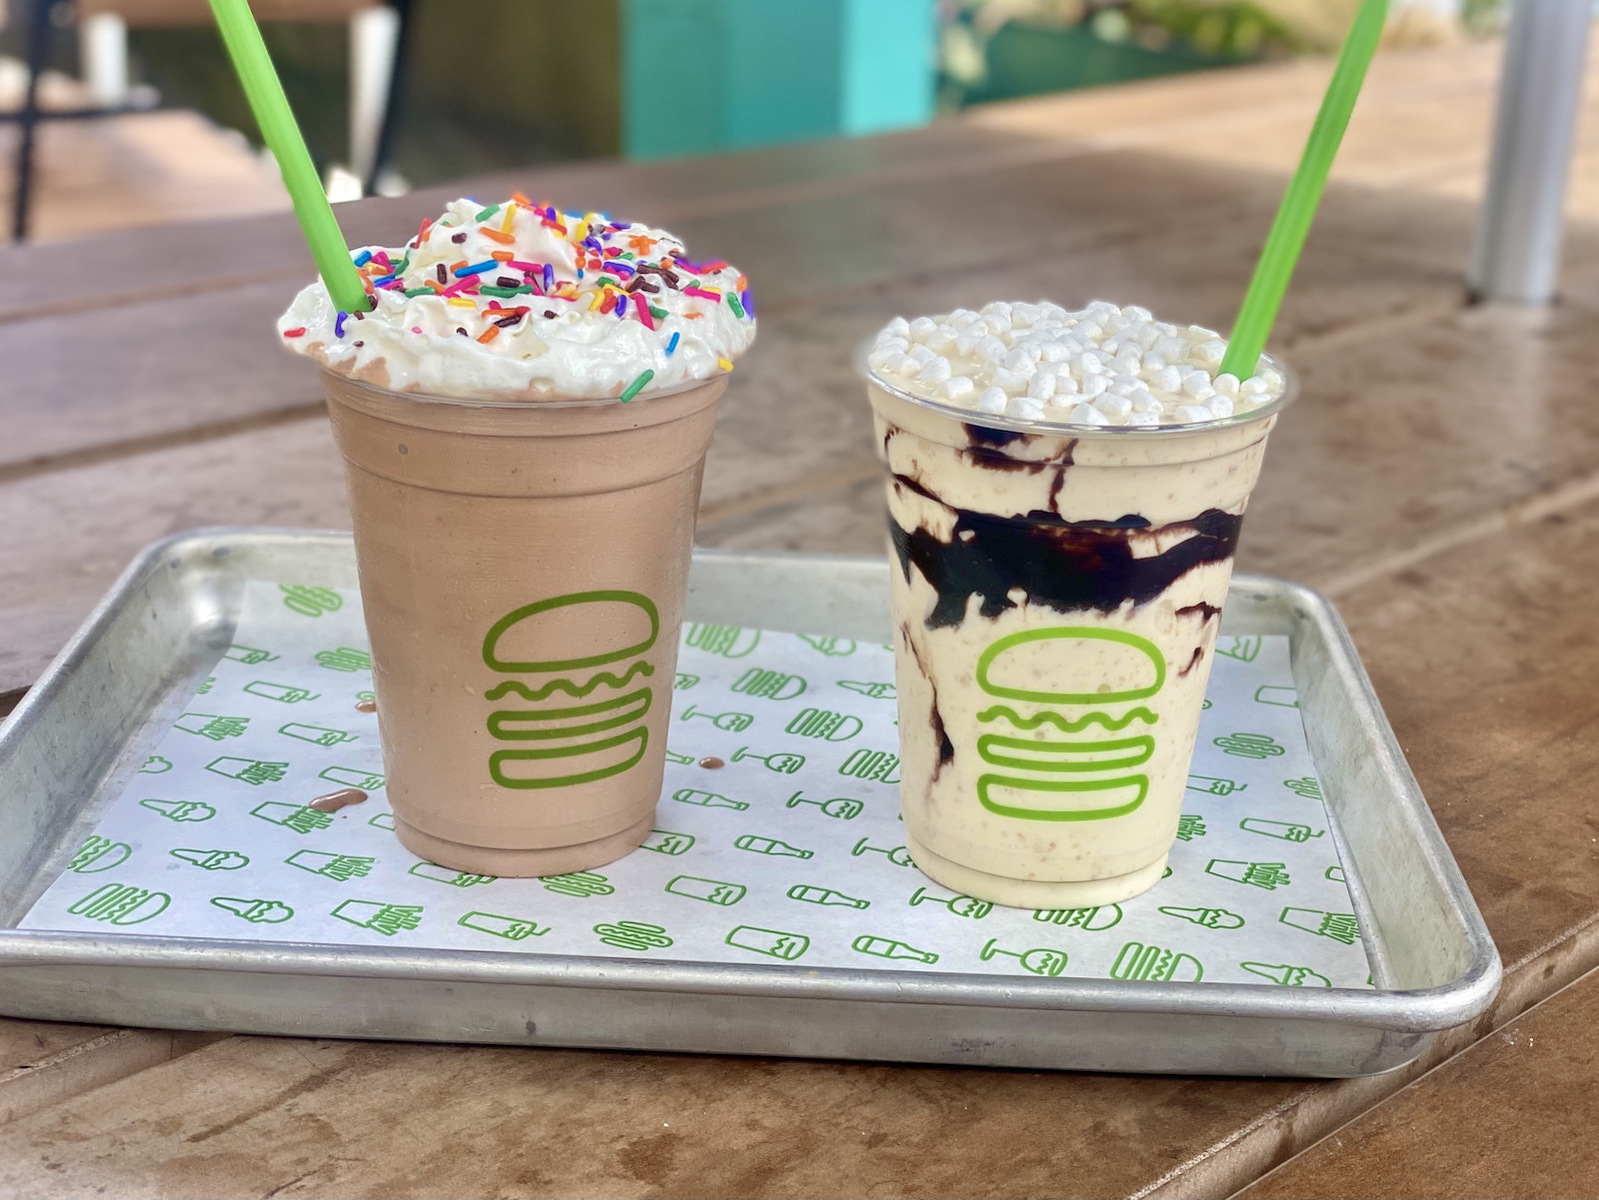 The new limited edition Milk Bar shakes at Shake Shack are totally worth it